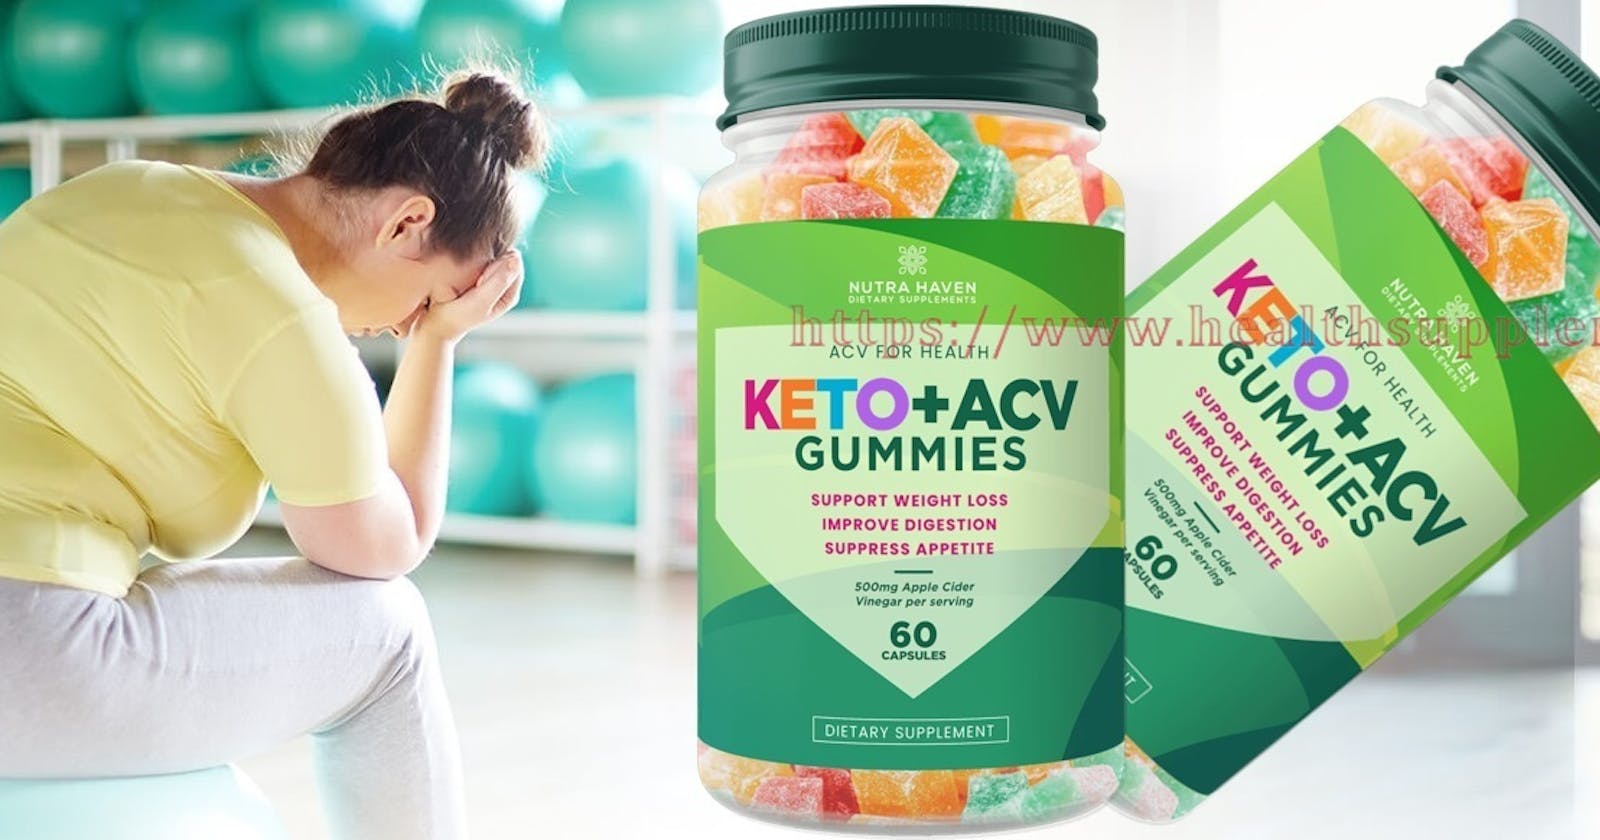 Nutra Haven Keto ACV Gummies {Clinically Proven} Loss Body Weight And Fat Without Following Hard Diet Or Exercise(USA)